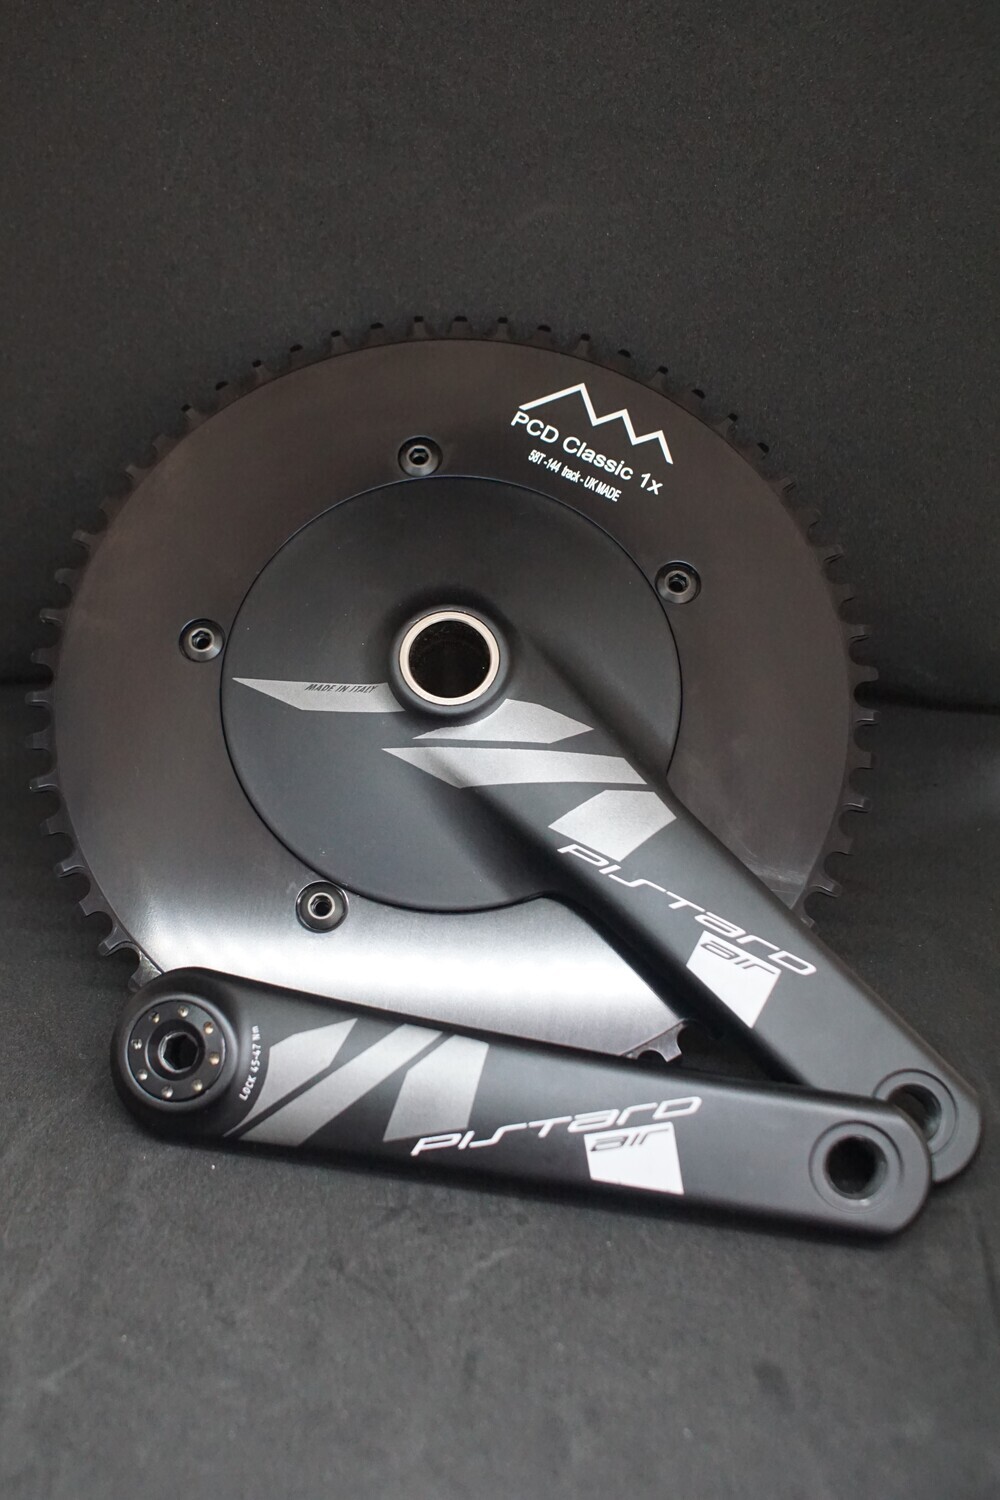 NEW! Miche Pistard Air crankset with PCD chainring